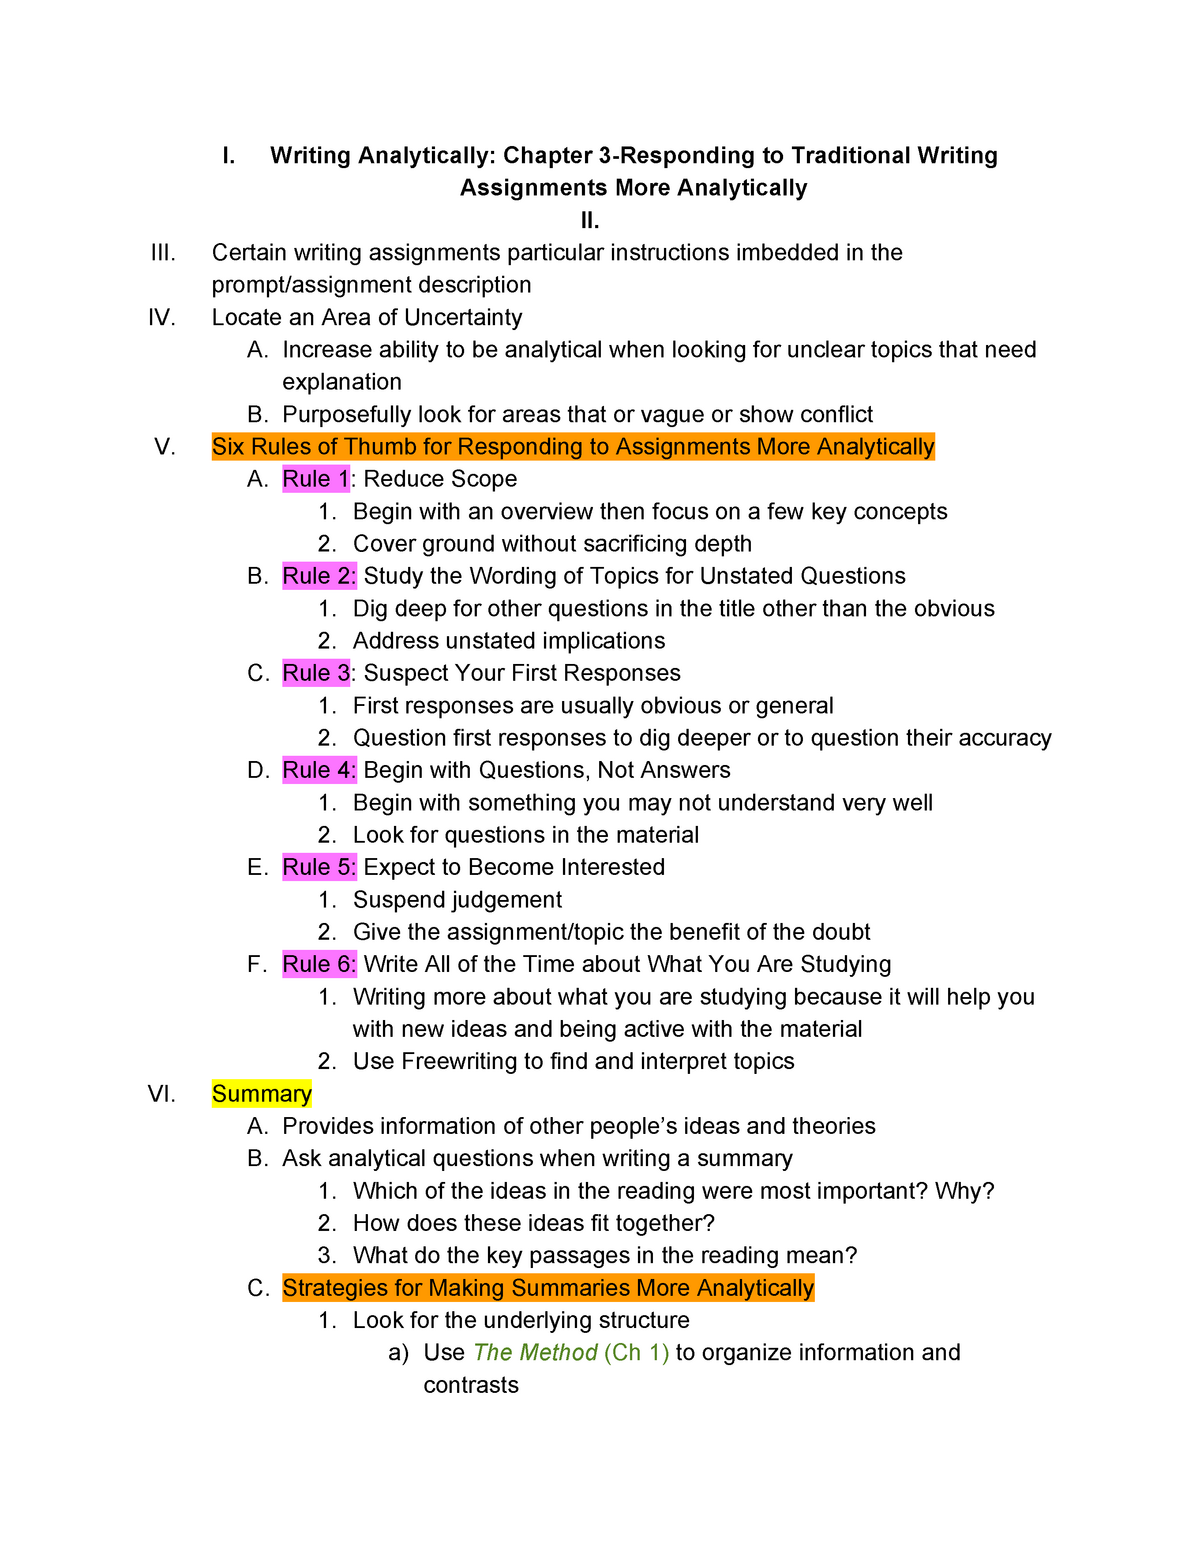 Writing Analytically - Chapter 5 Notes - Writing Analytically